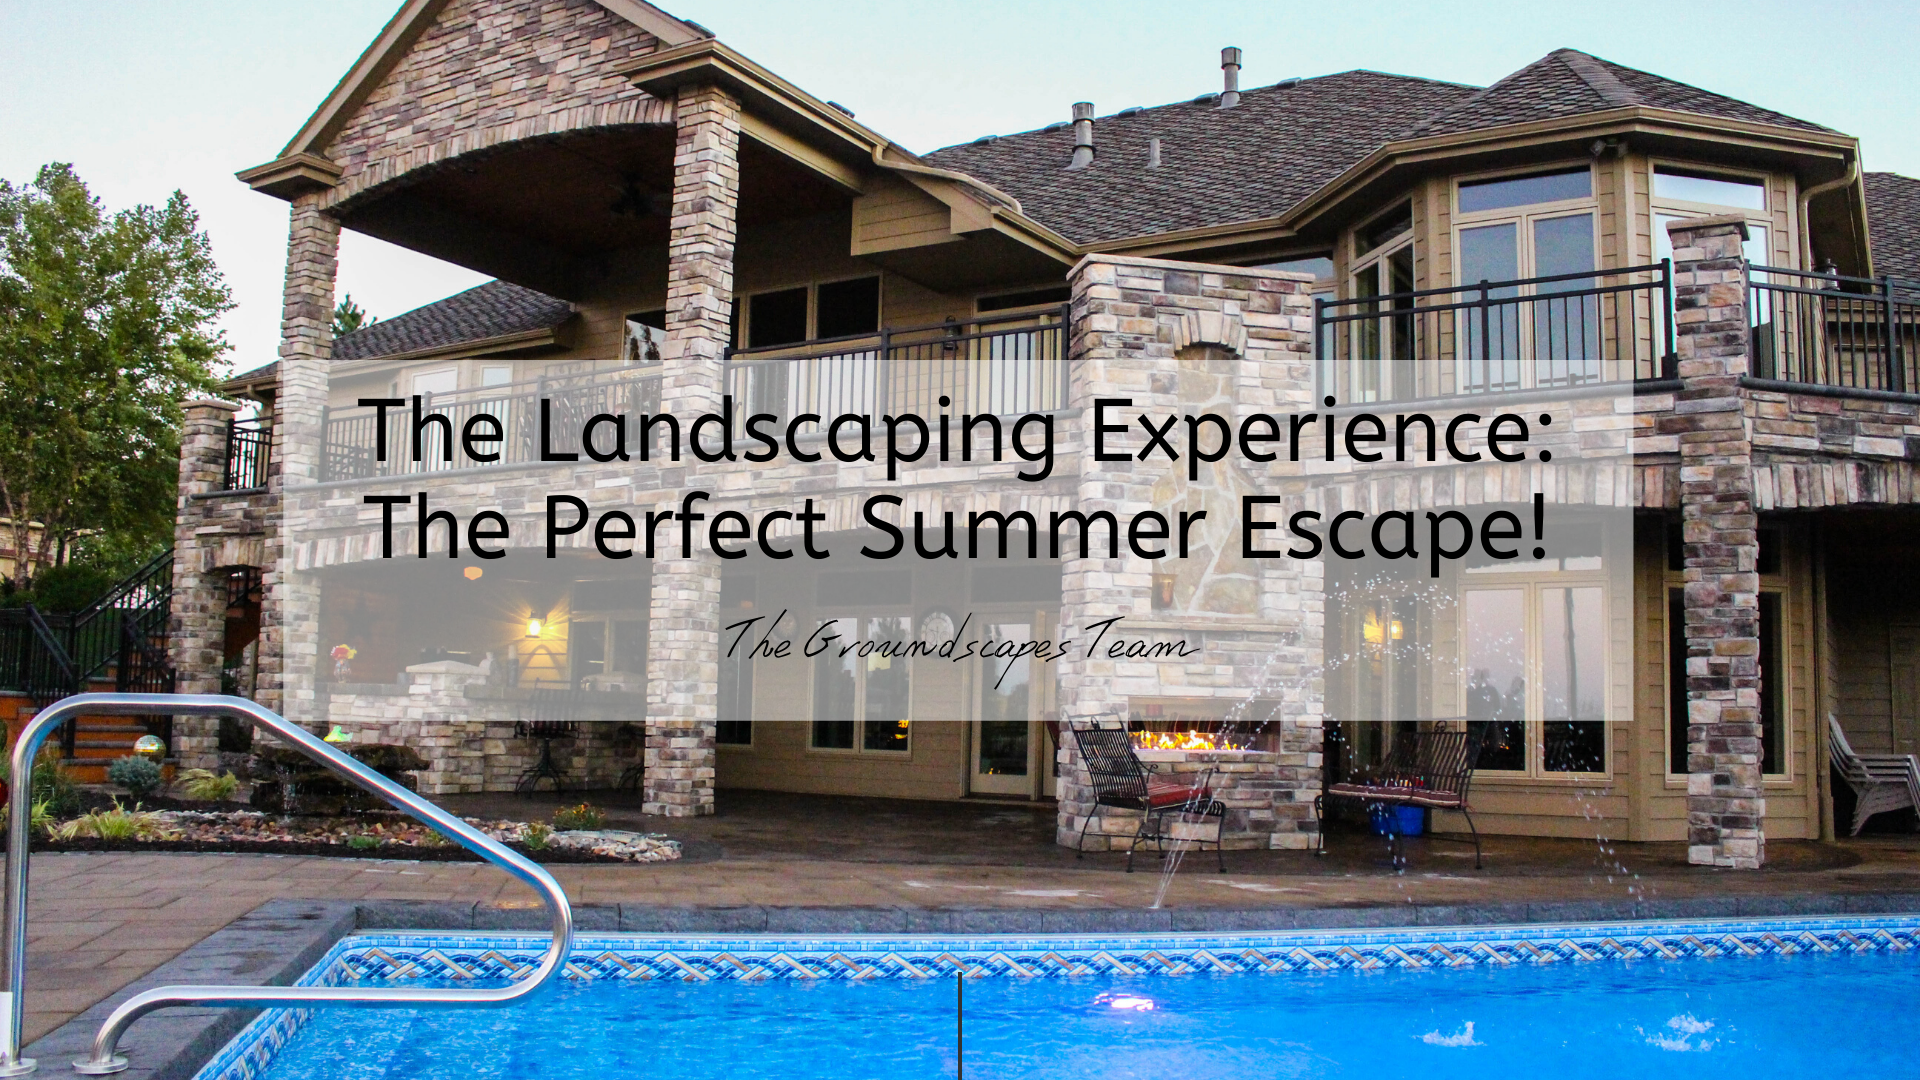 The Landscaping Experience: The Perfect Summer Escape!